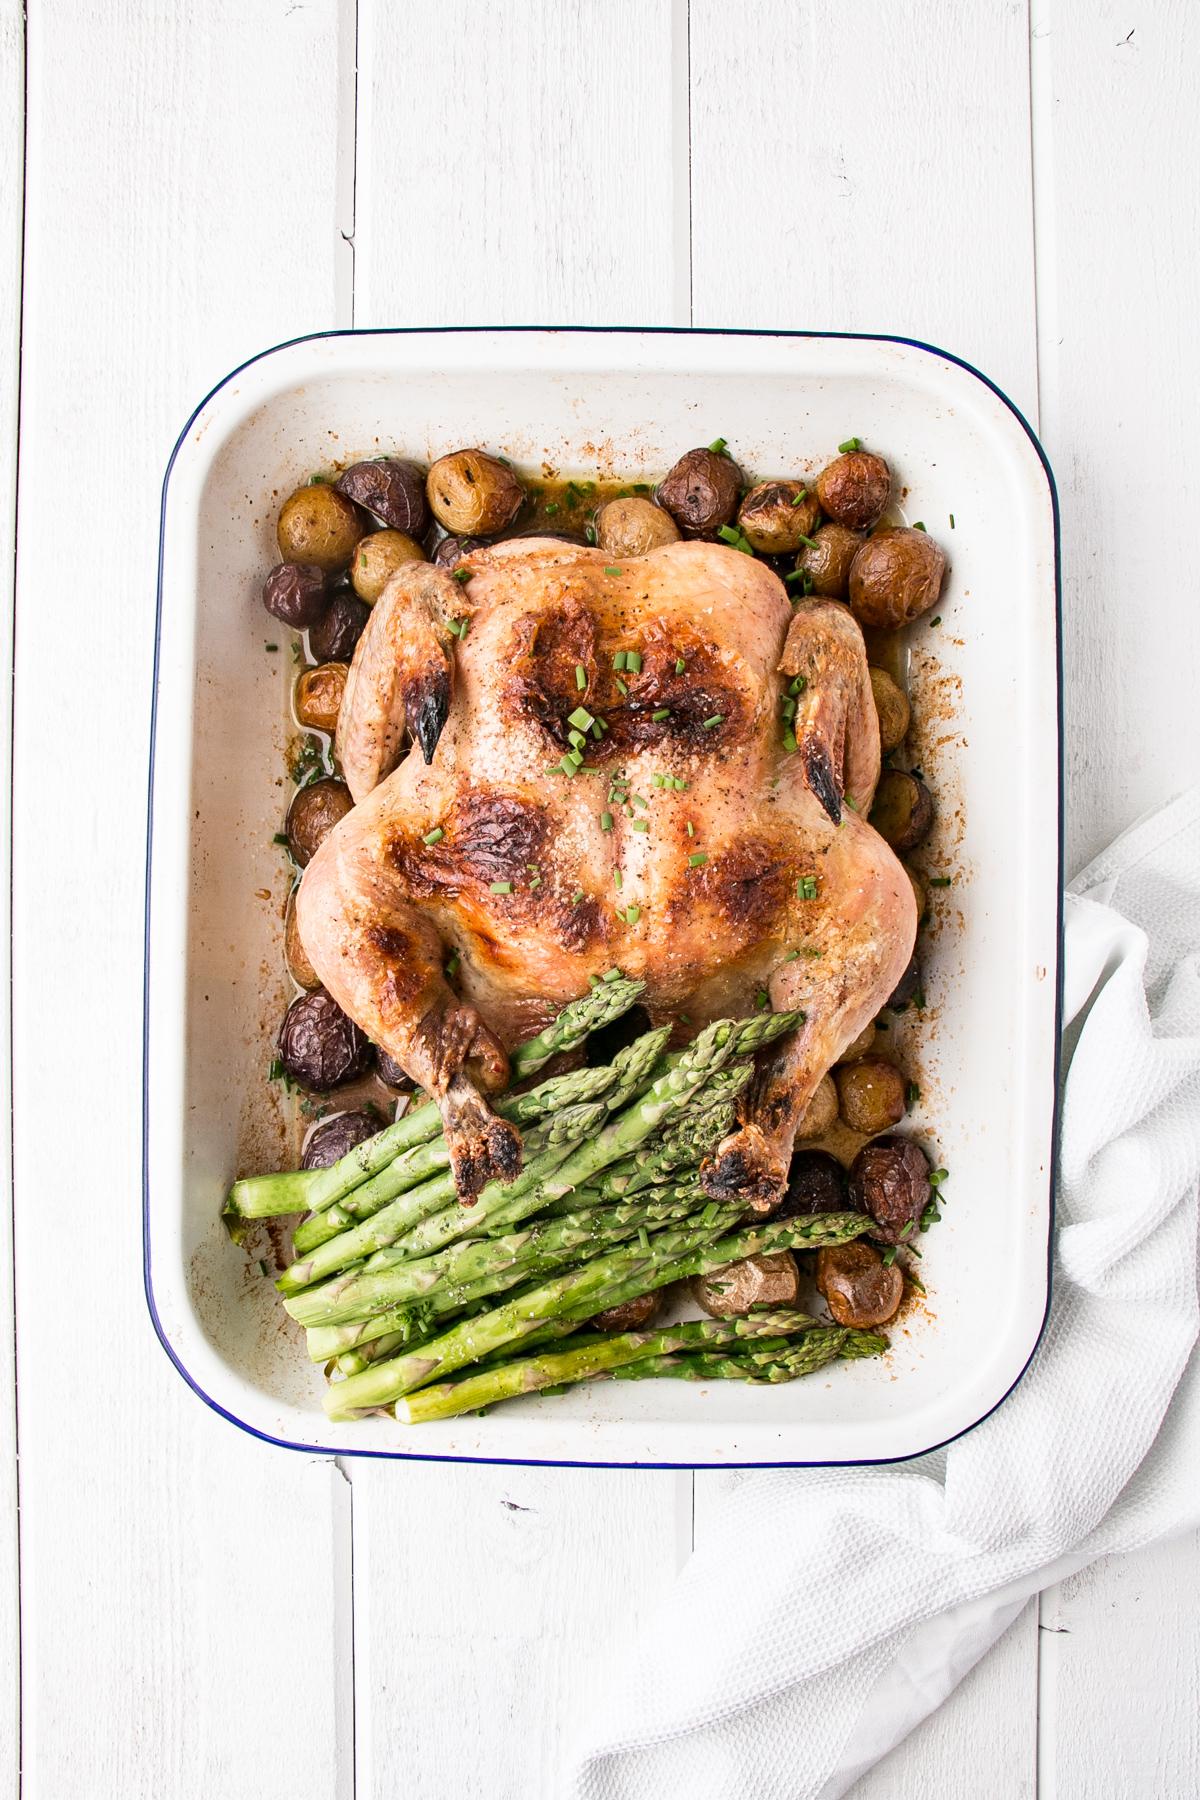 whole roasted chicken, potatoes and asparagus in a white baking dish